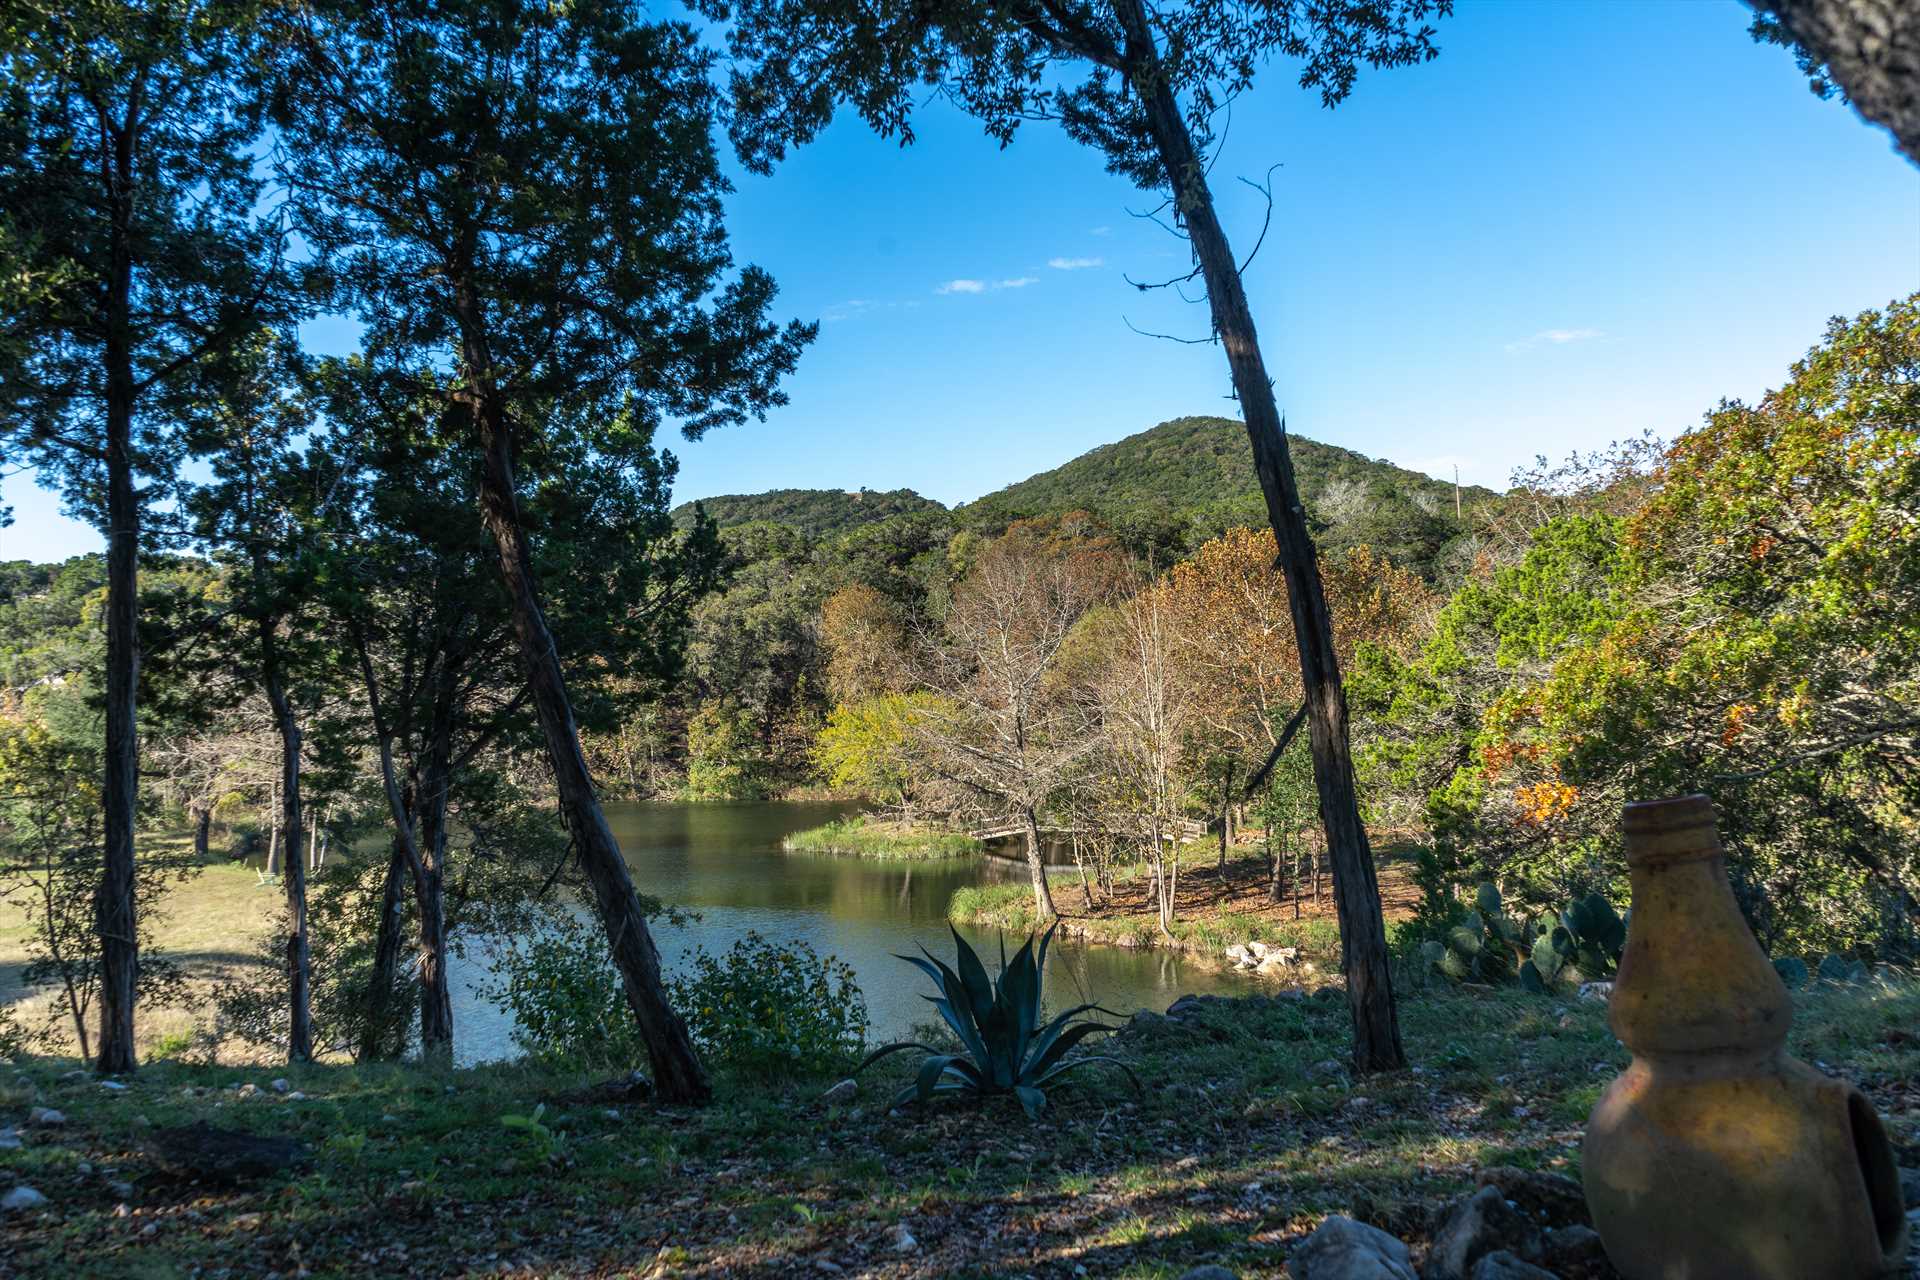                                                 You'll have shared access to the lake on the property, but there's plenty of fun and natural beauty to go around!